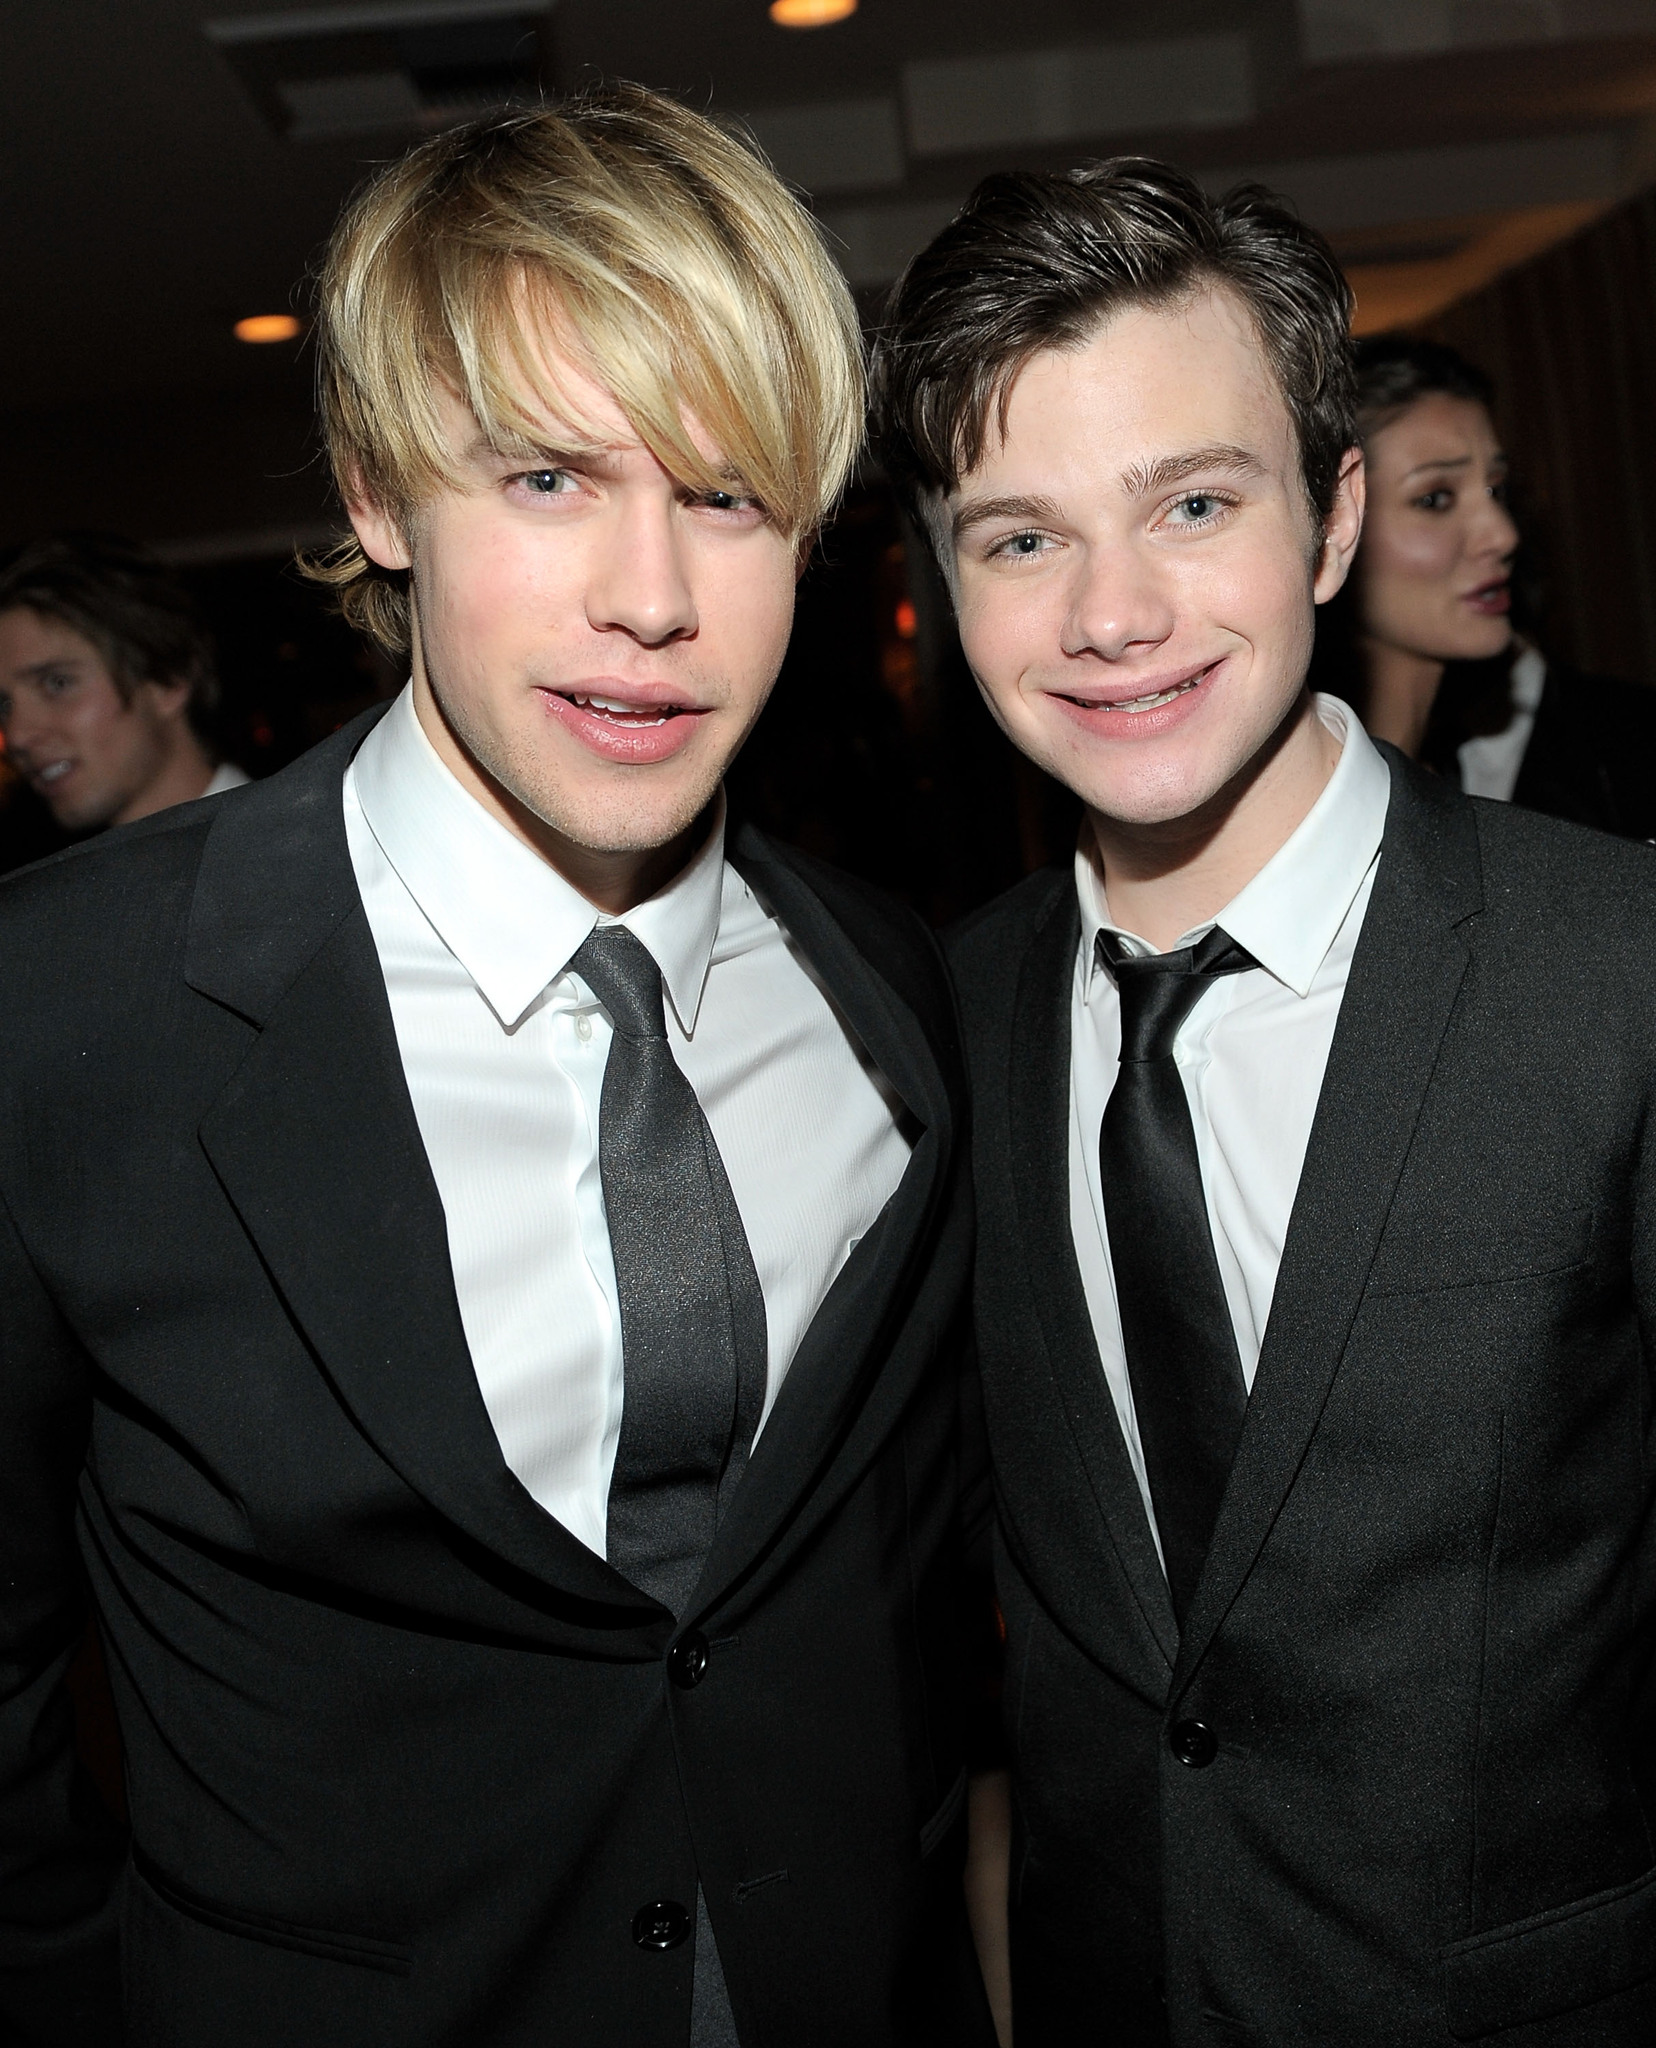 Chris Colfer and Chord Overstreet